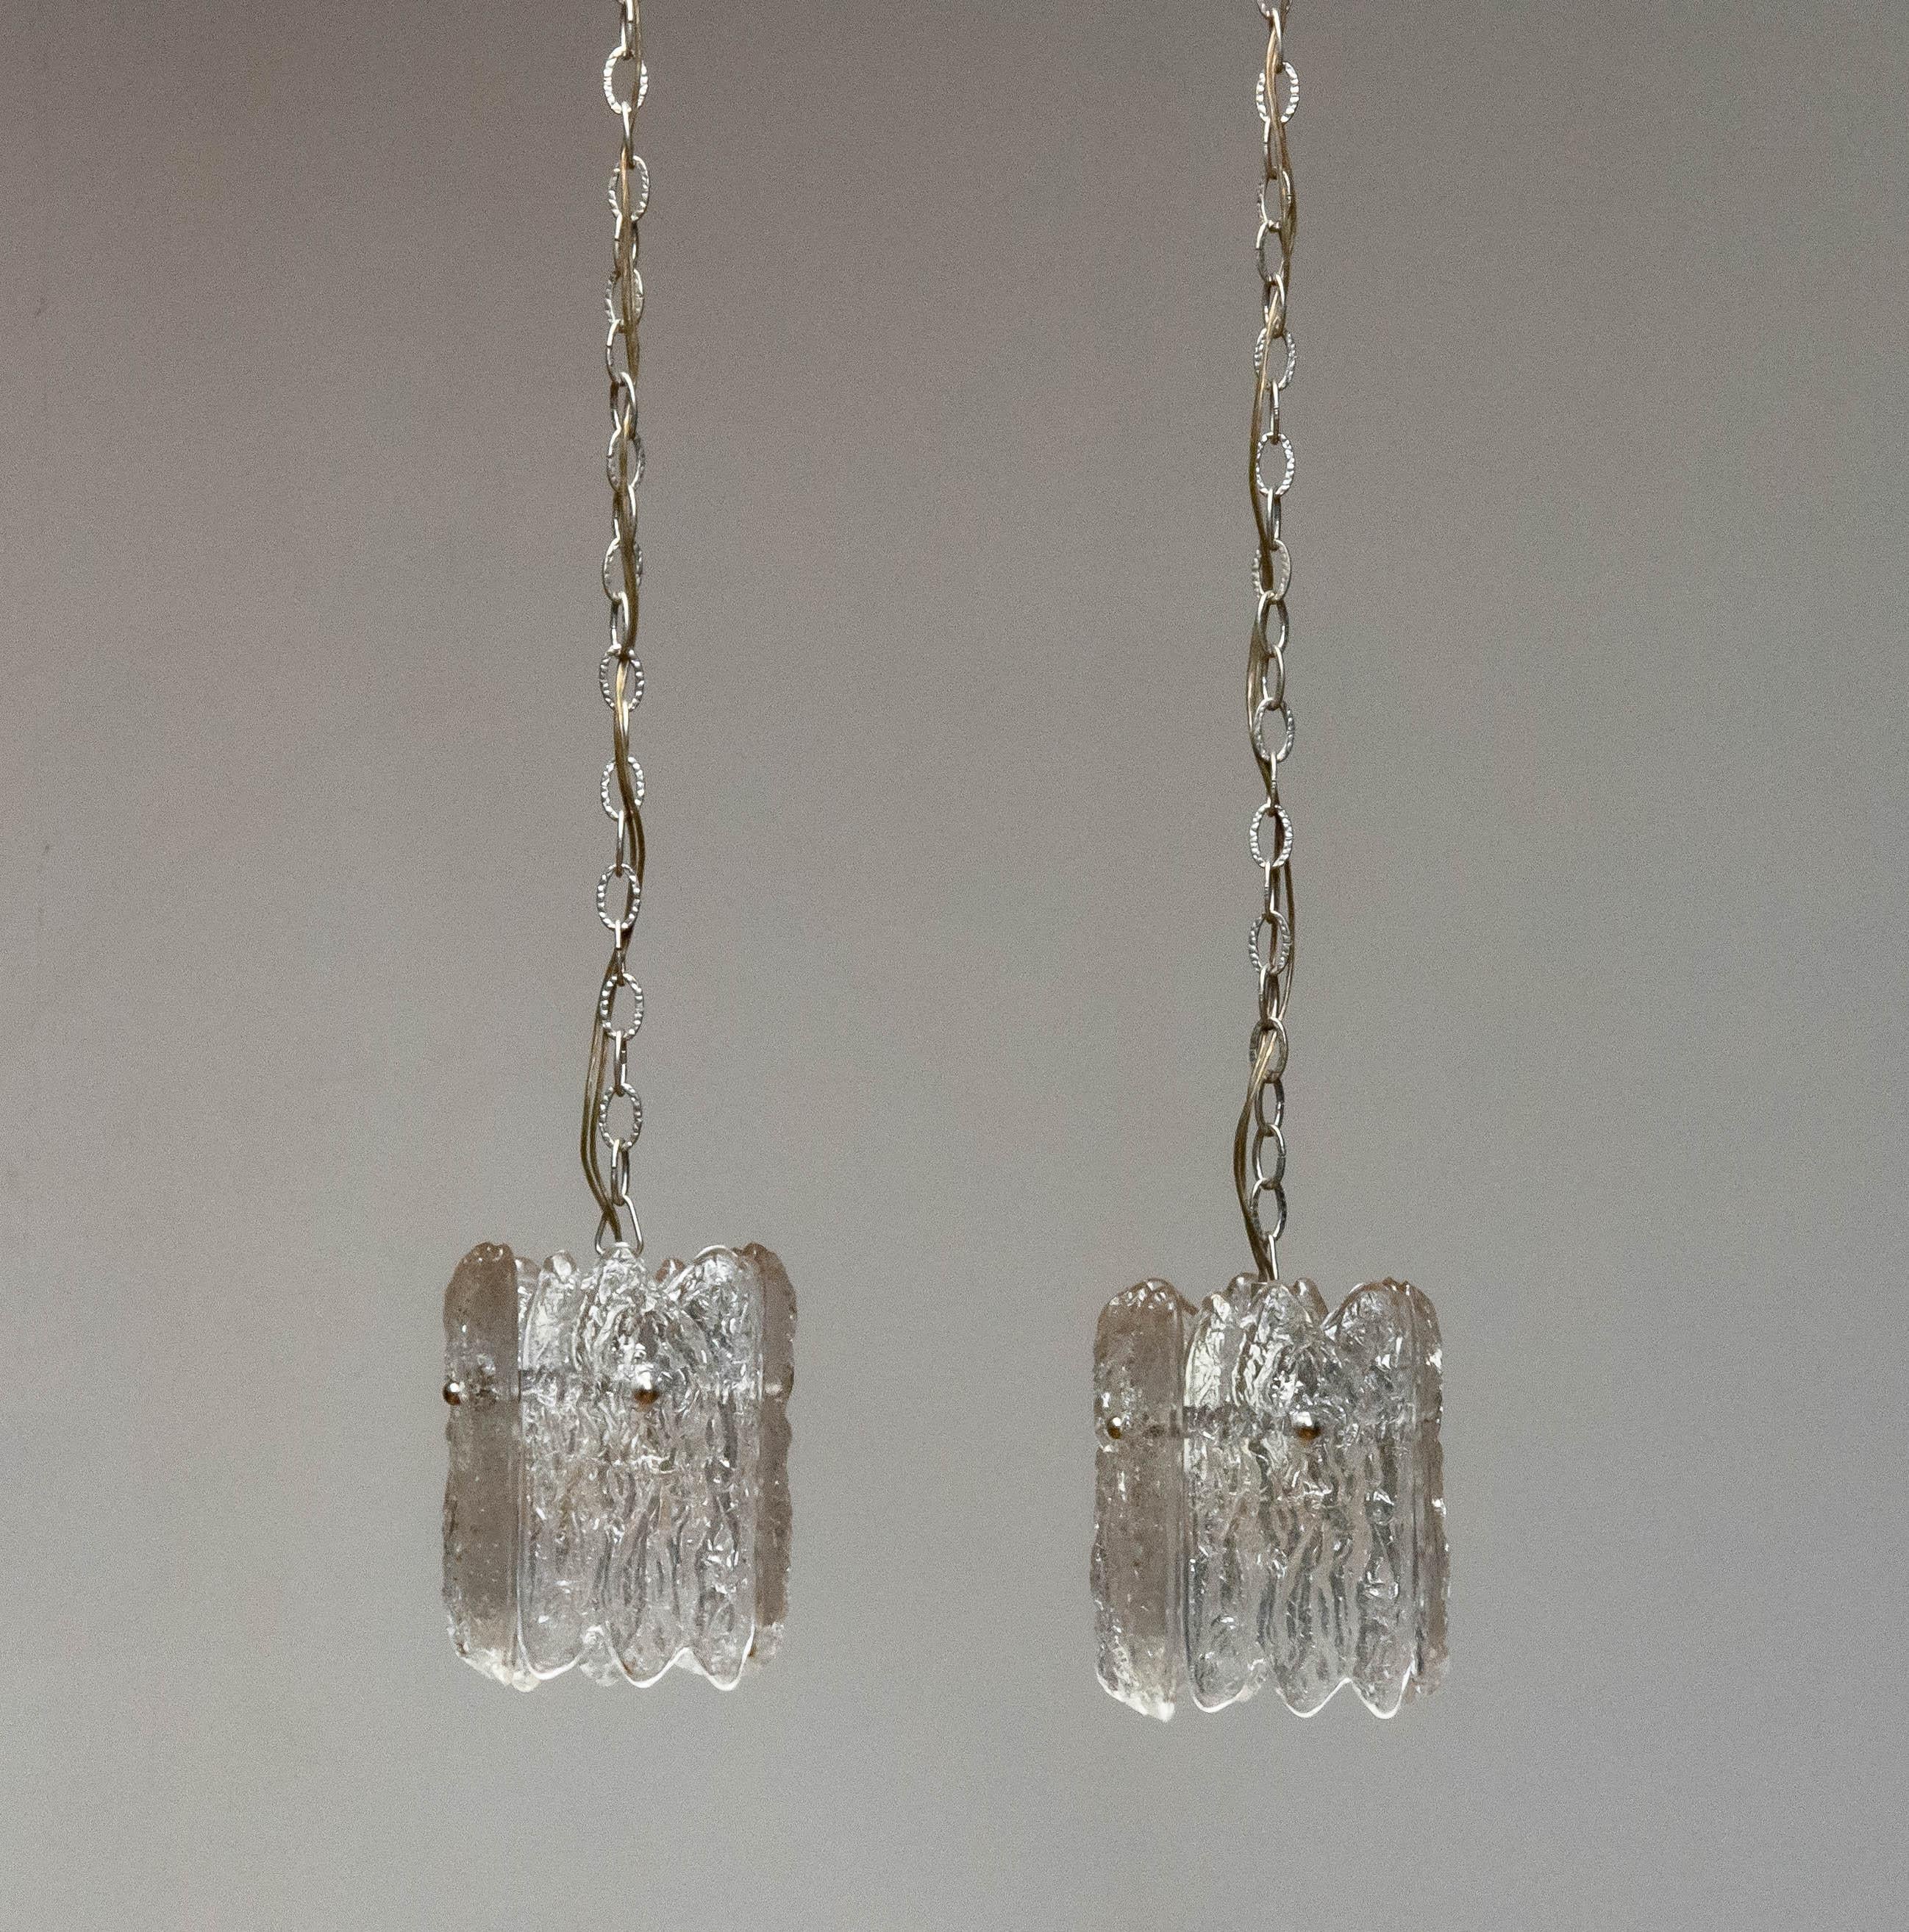 1960s Pair Clear Crystal Window Or Bar Lights By Carl Fagerlund Orrefors Sweden (Metall) im Angebot